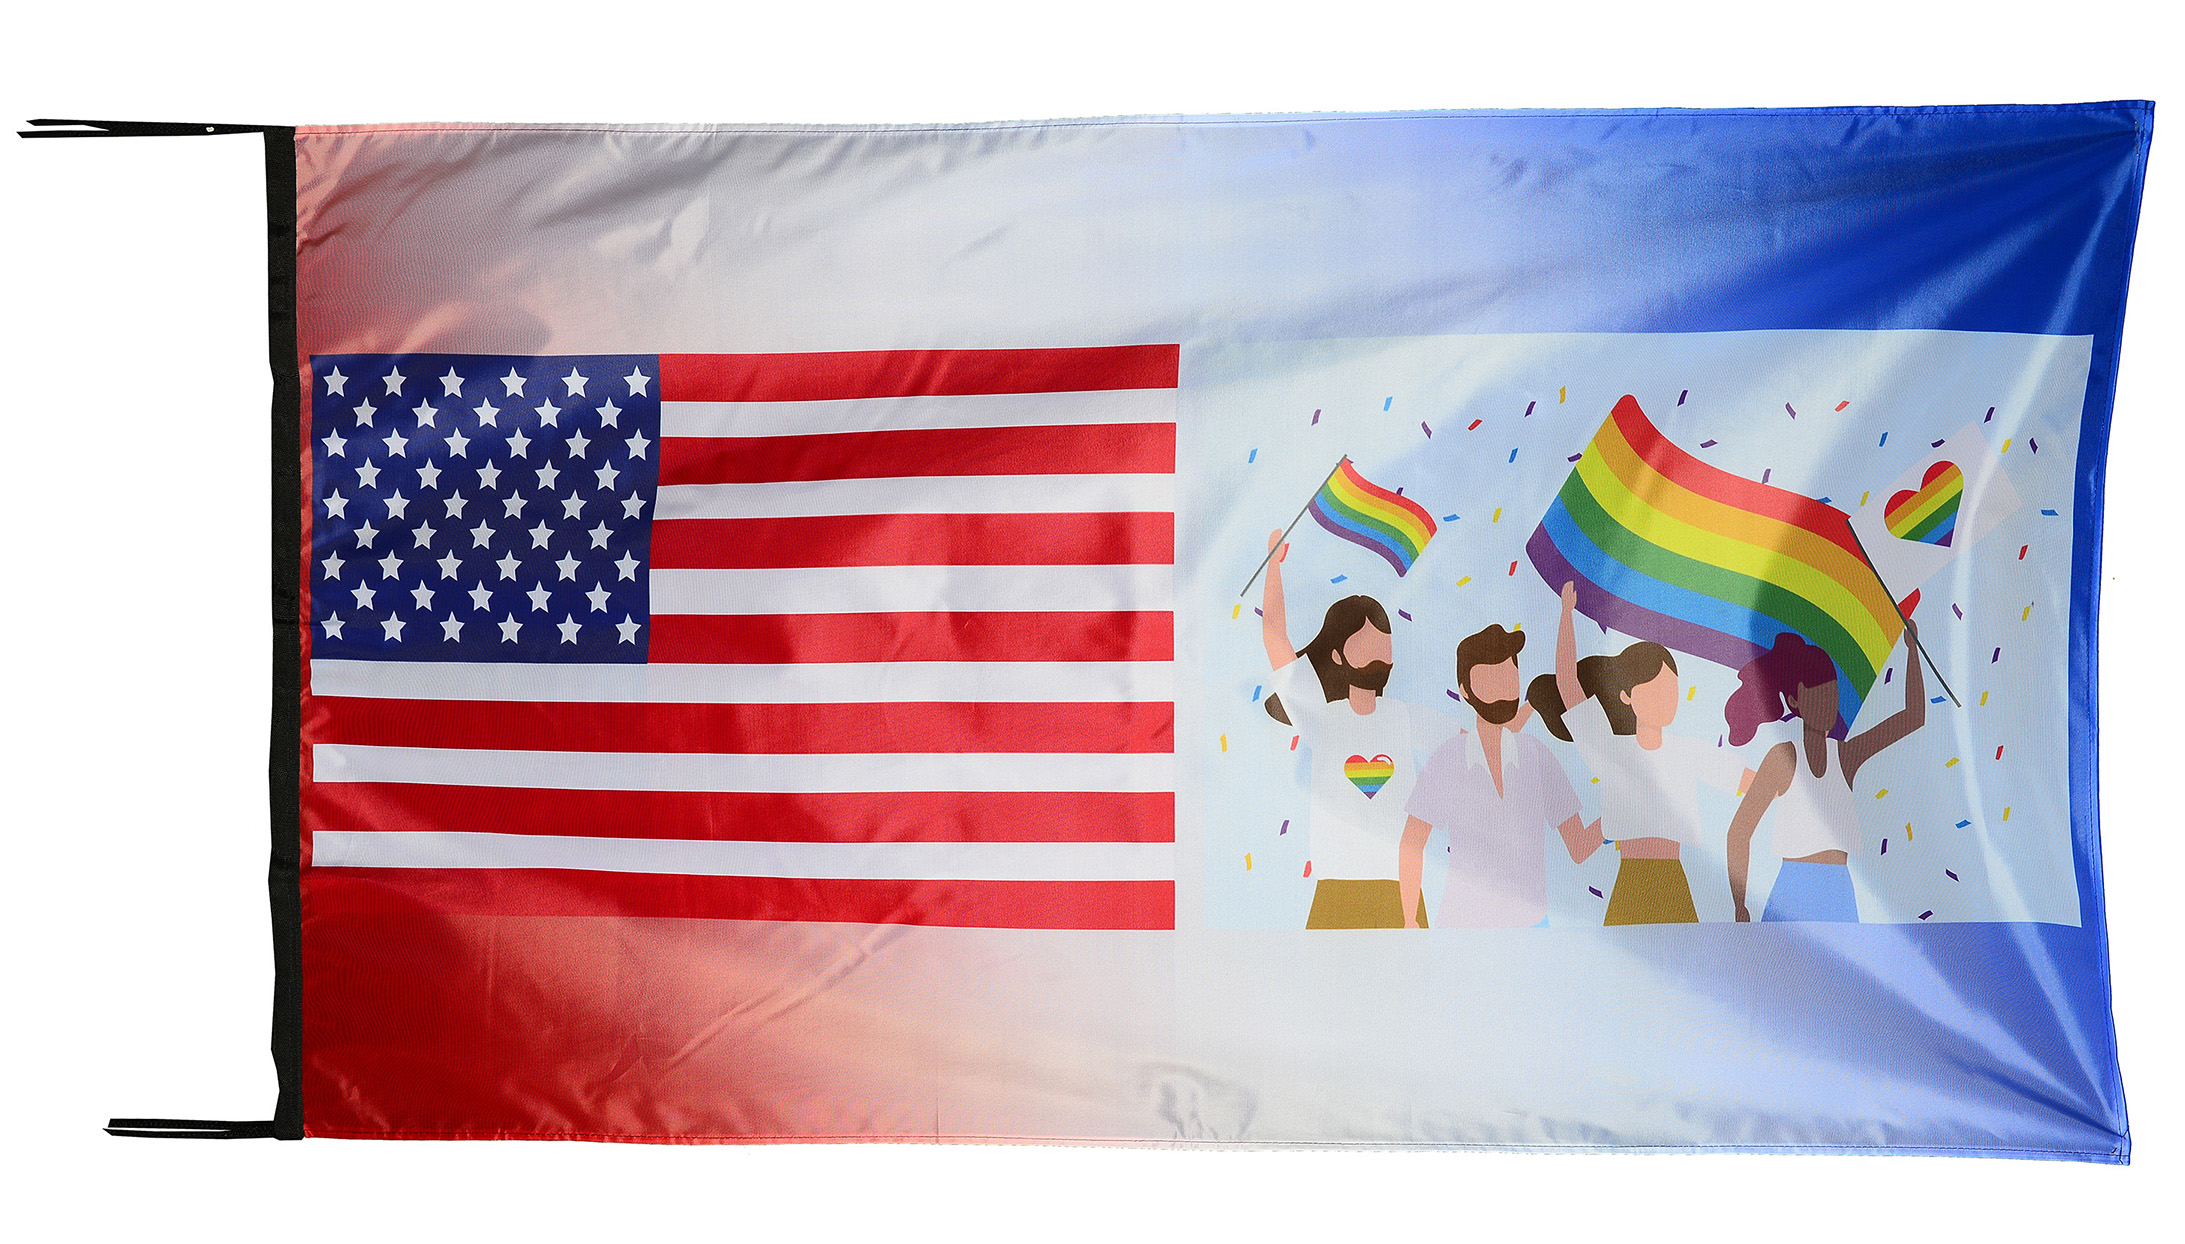 Flag  047 USA / US Country / United States Of America and US Army / Patriotic / Marine / Military / Pride Hybrid Weather-Resistant Polyester Outdoor Flag Landscape Banner / Vivid Colors / 3 X 5 FT (150 x 90cm) International Flags for Sale